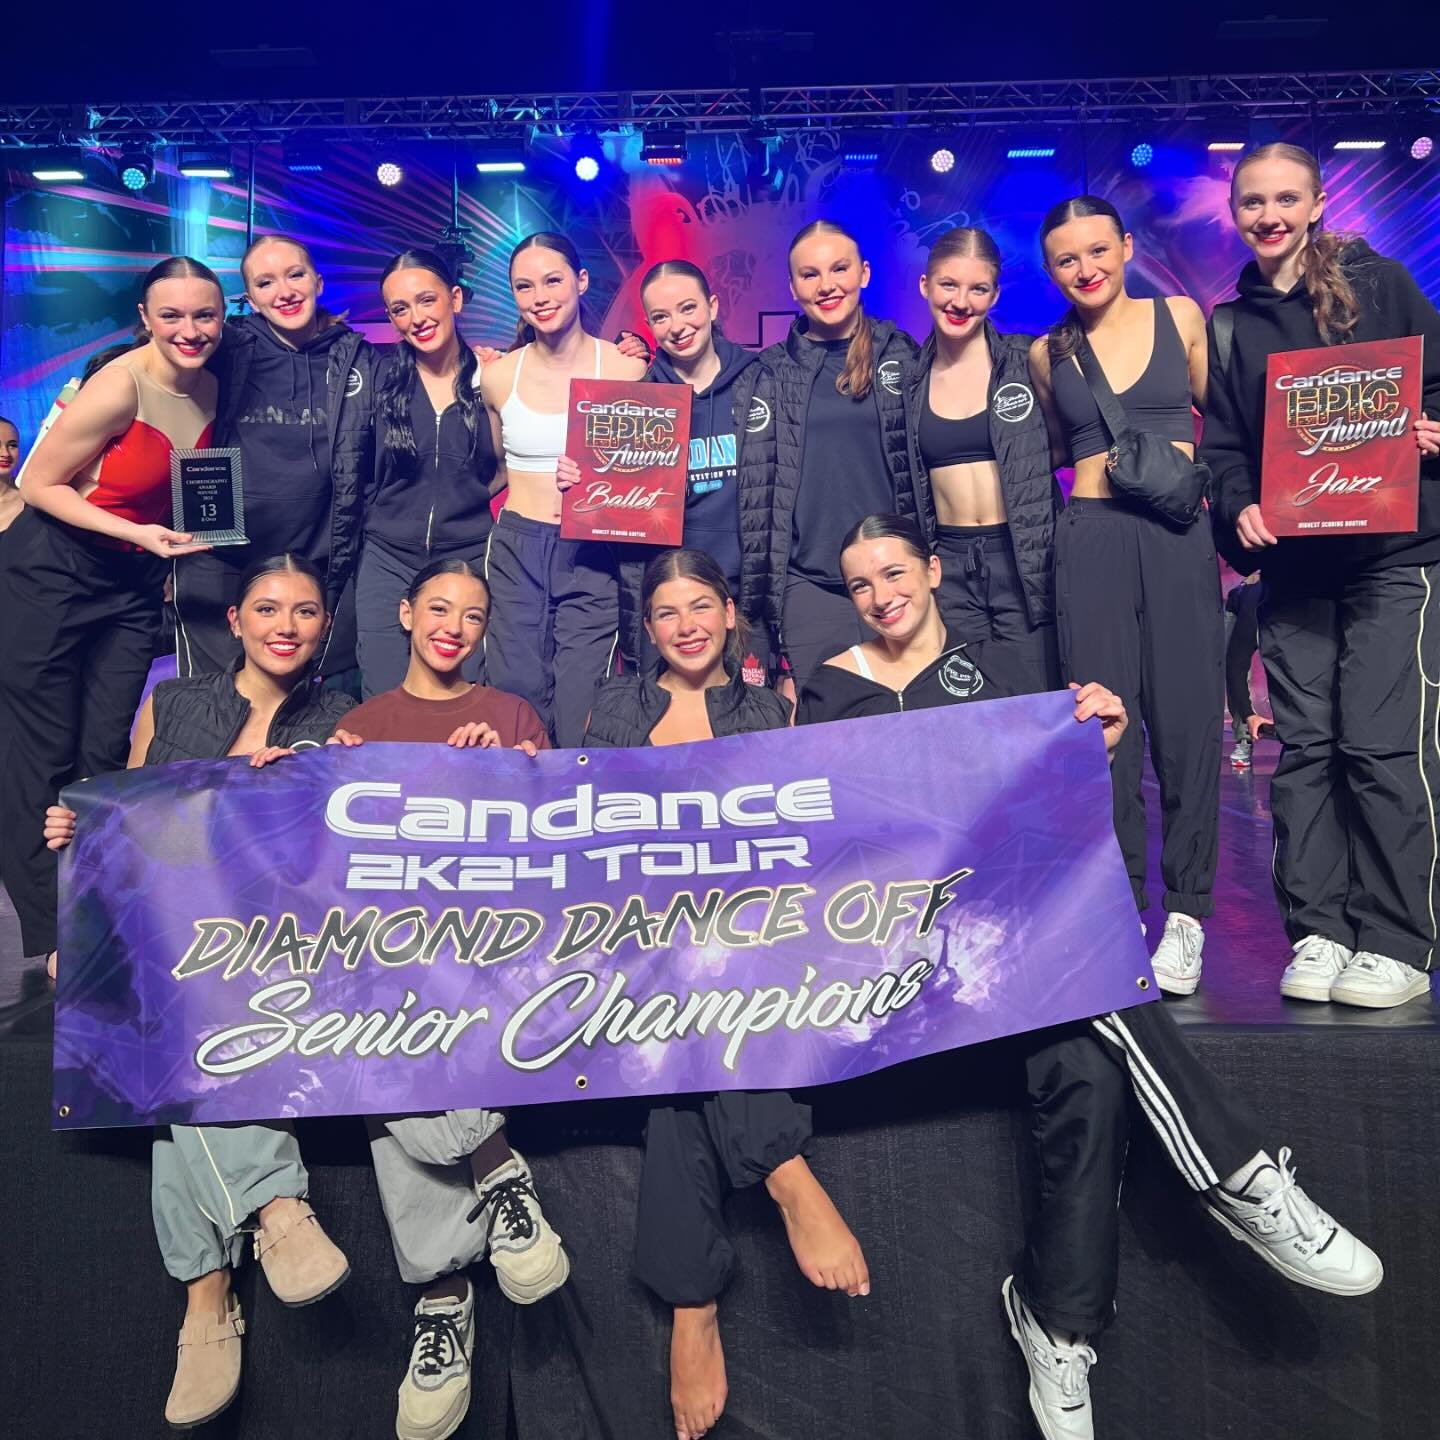 And&hellip; 🎉Congratulations to the Diamond Dance Off participants!!! These pieces received the school&rsquo;s top 3 Diamond scores for ages 12 &amp; Under, and top 3 Diamond scores for 13 &amp; Over at @candancecompetition ! We are so thrilled with